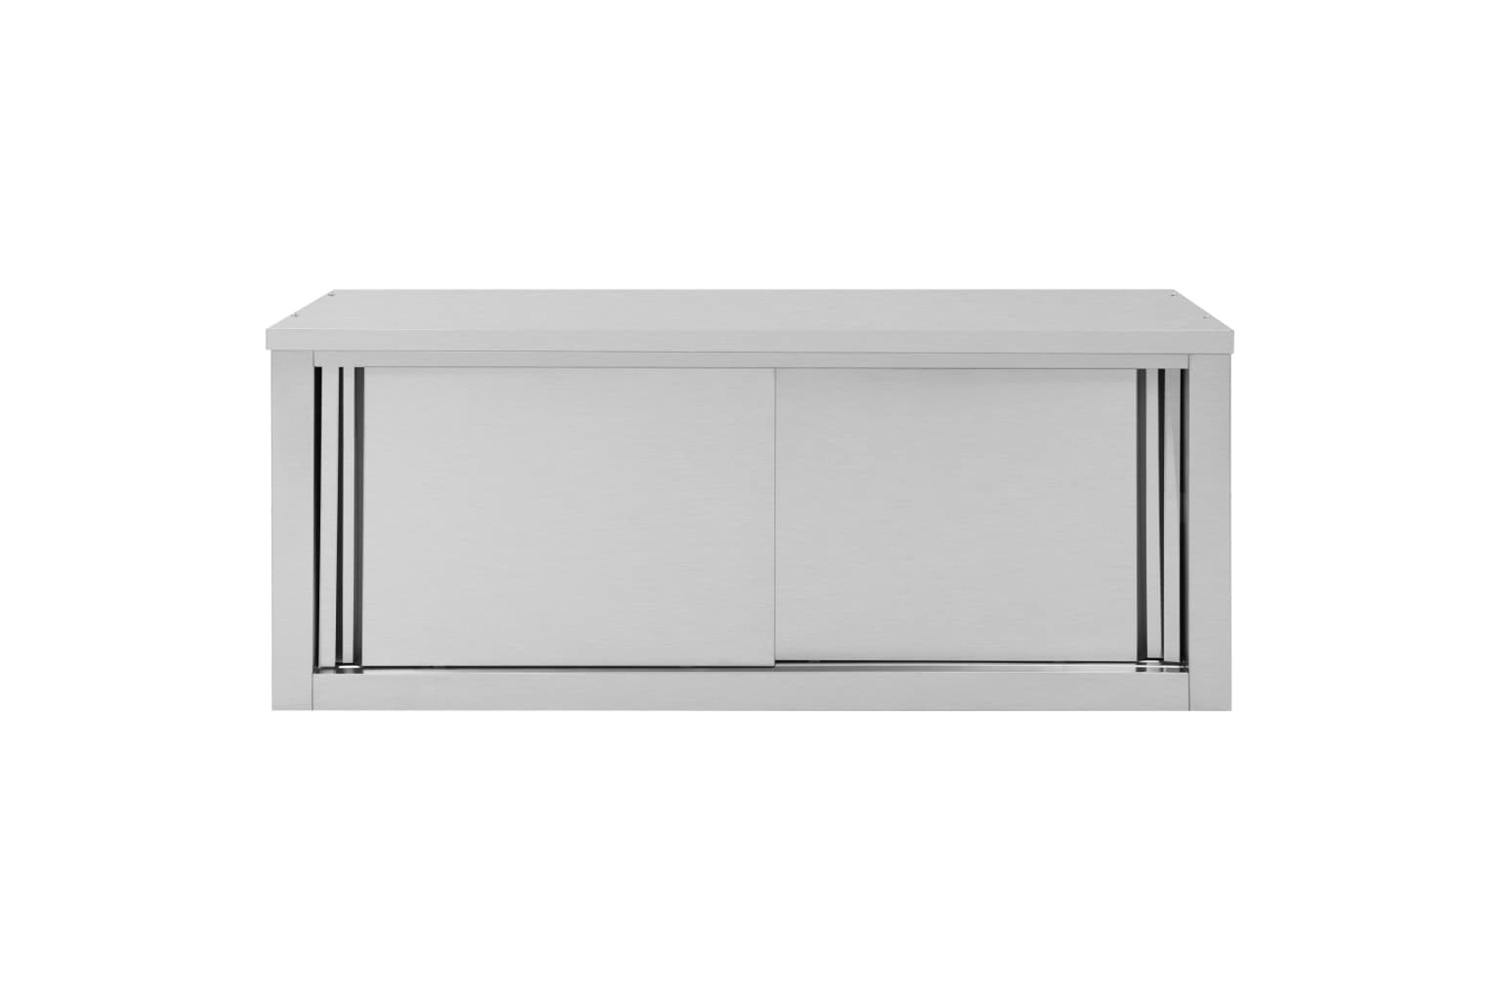 Vidaxl 51053 Kitchen Wall Cabinet With Sliding Doors 120x40x50 Cm Stainless Steel